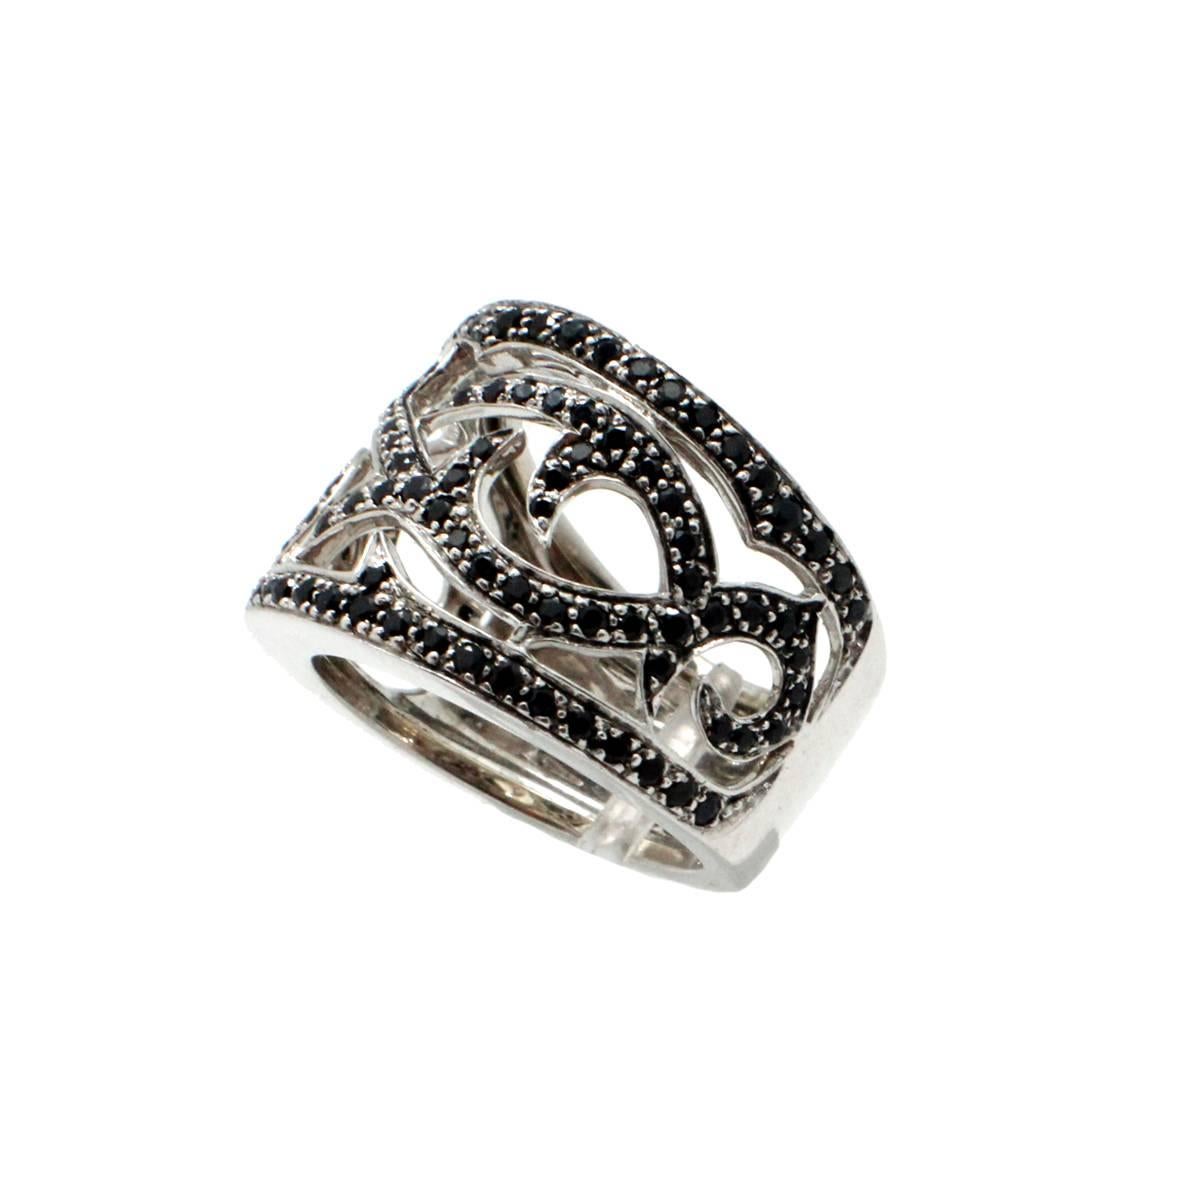 This fun band is made in 18k white gold, and it is set with several round black sapphires. The band measures 15mm wide, and it weighs 10.59 grams. The ring is a size 5.25.